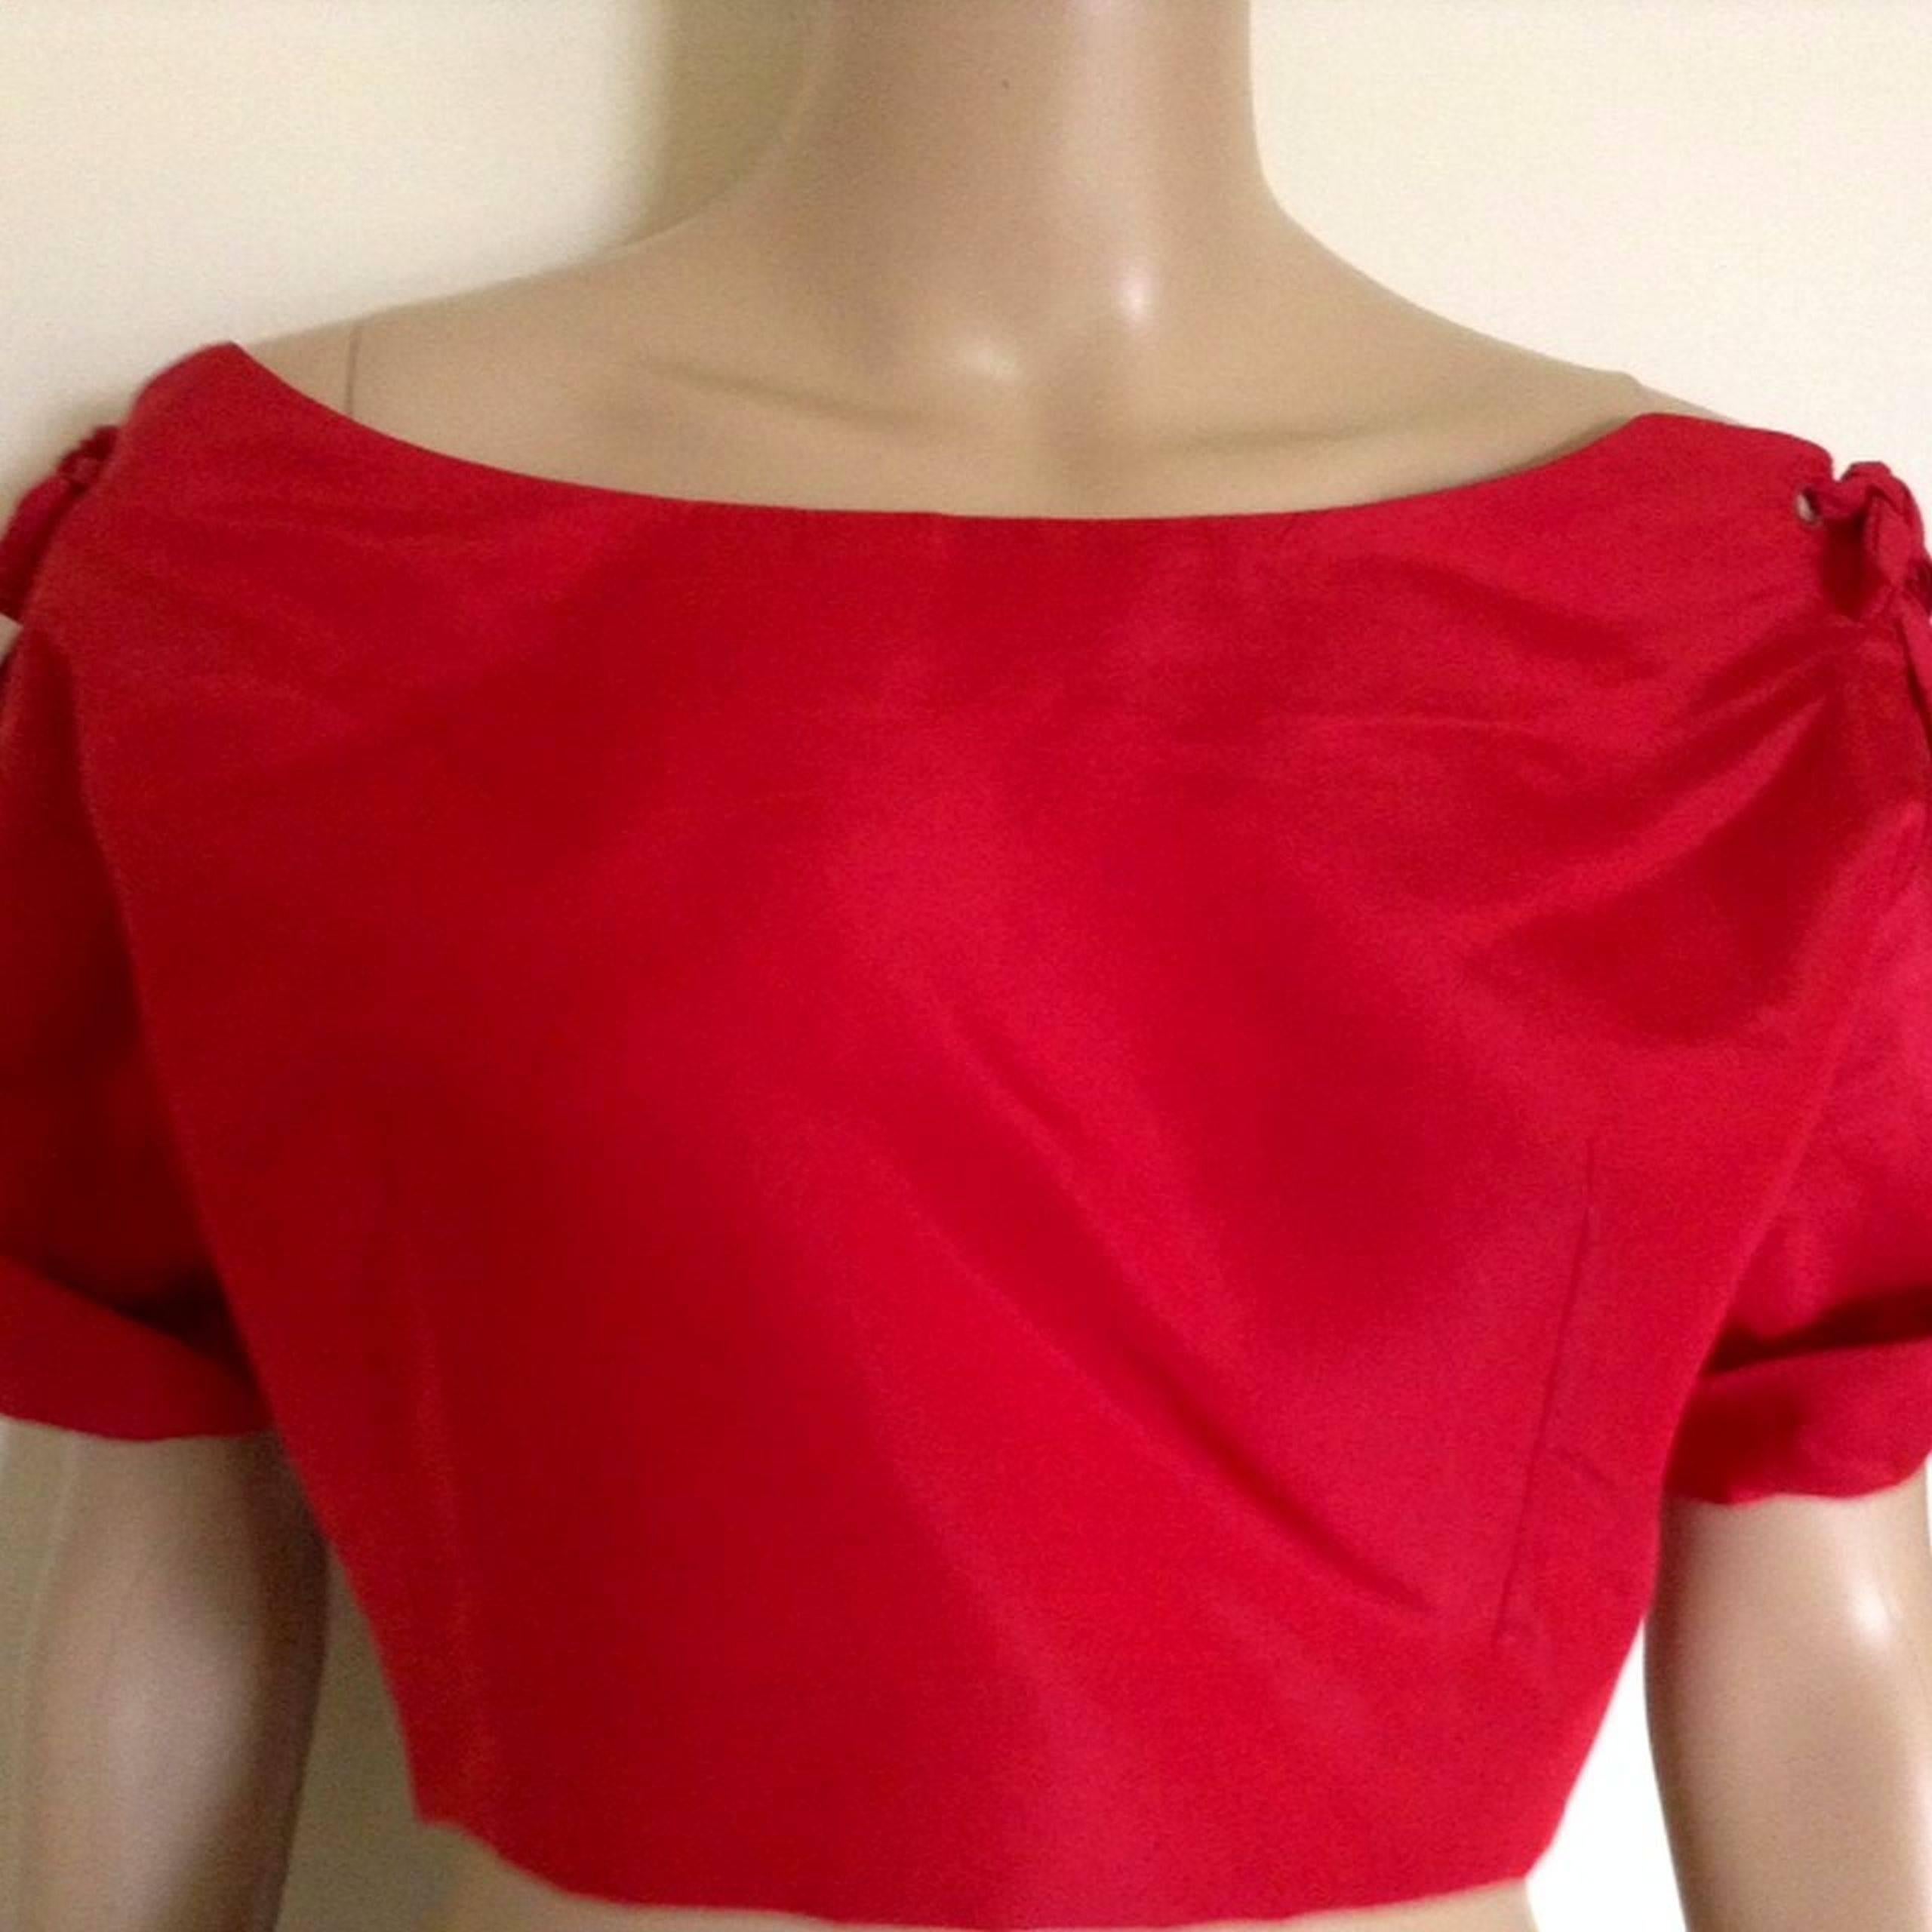 1953 Christian Dior Red Silk Bolero Jacket with Bow Details For Sale 2